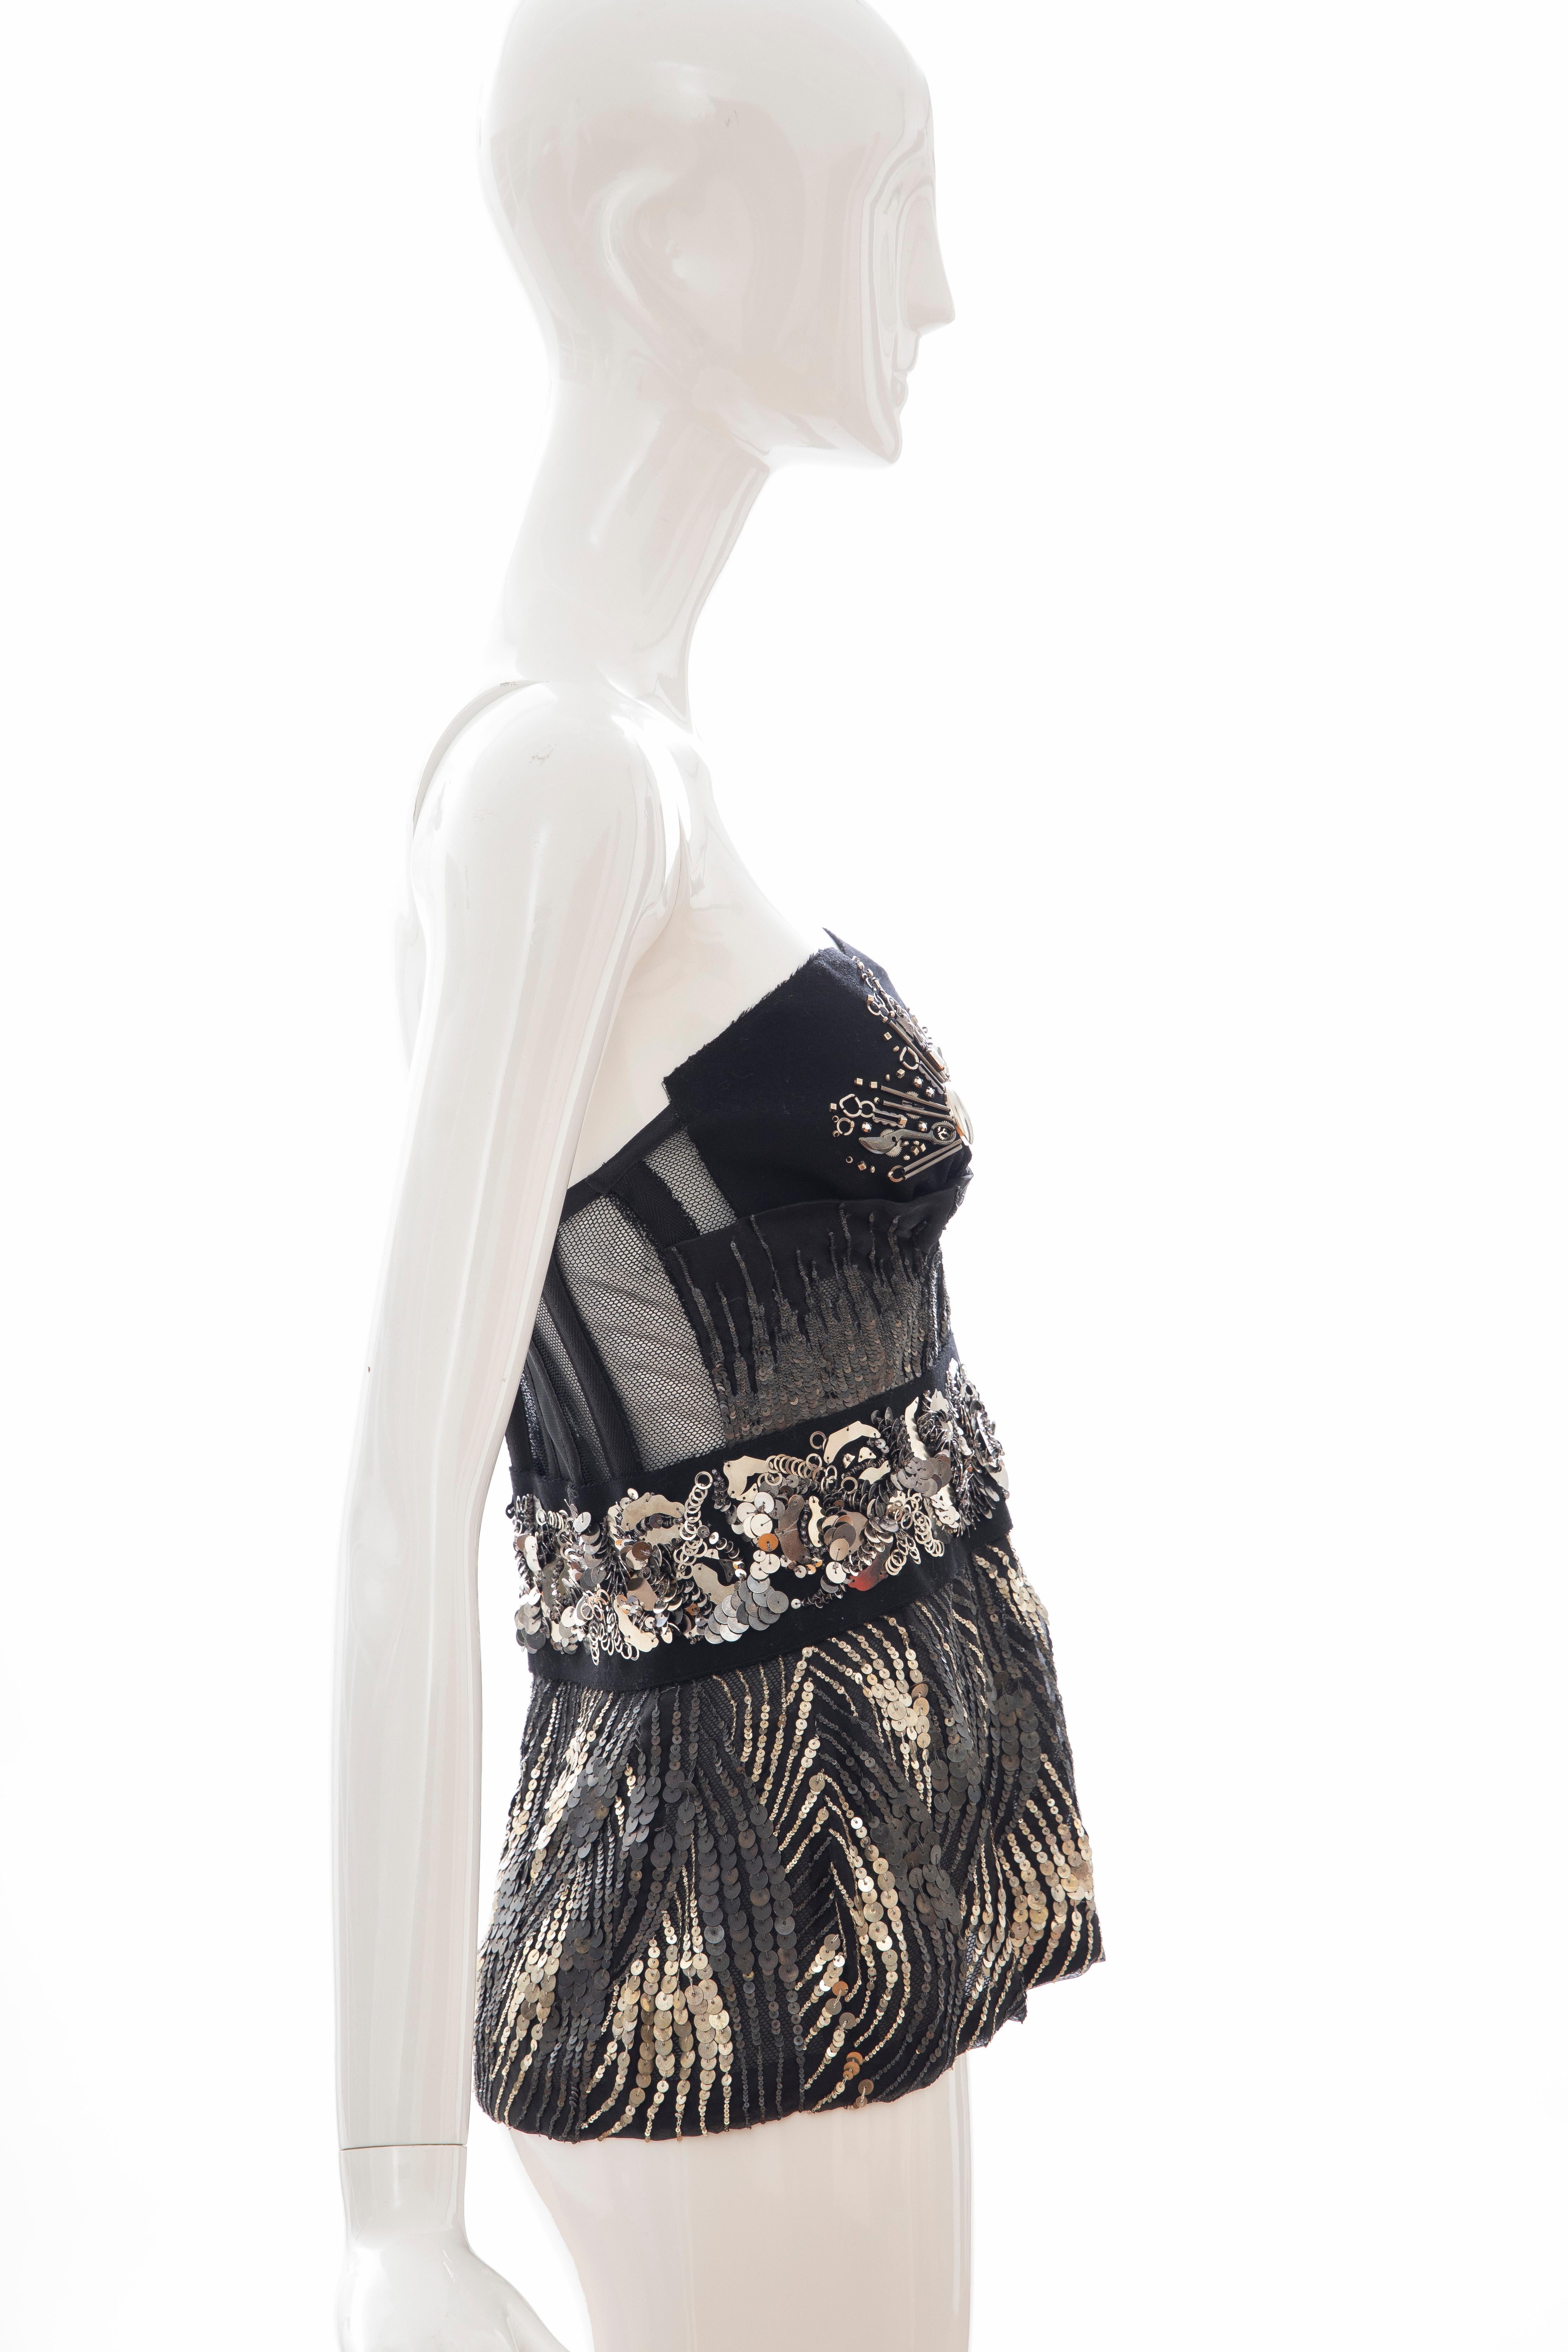 Women's Prada Runway Black Strapless Embroidered Sequin Top, Fall 2006 For Sale